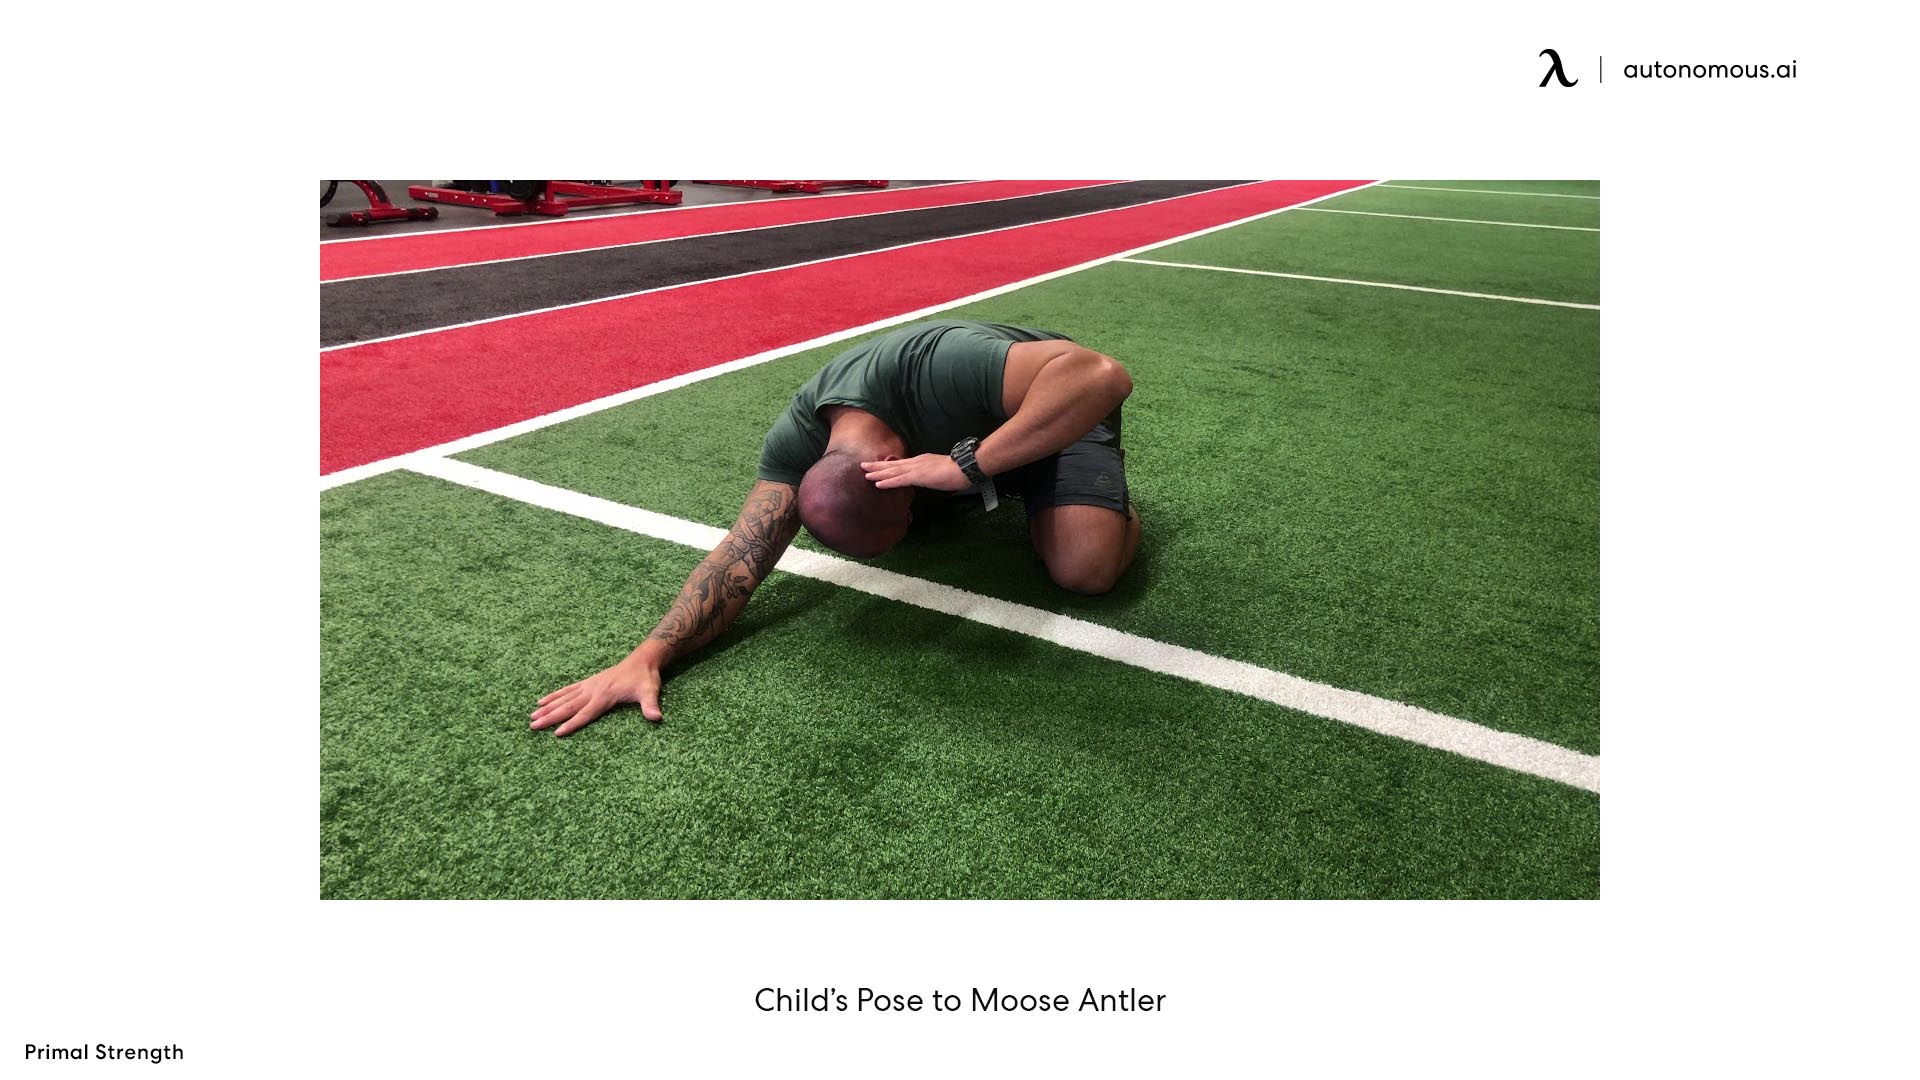 Child’s Pose back alignment exercises